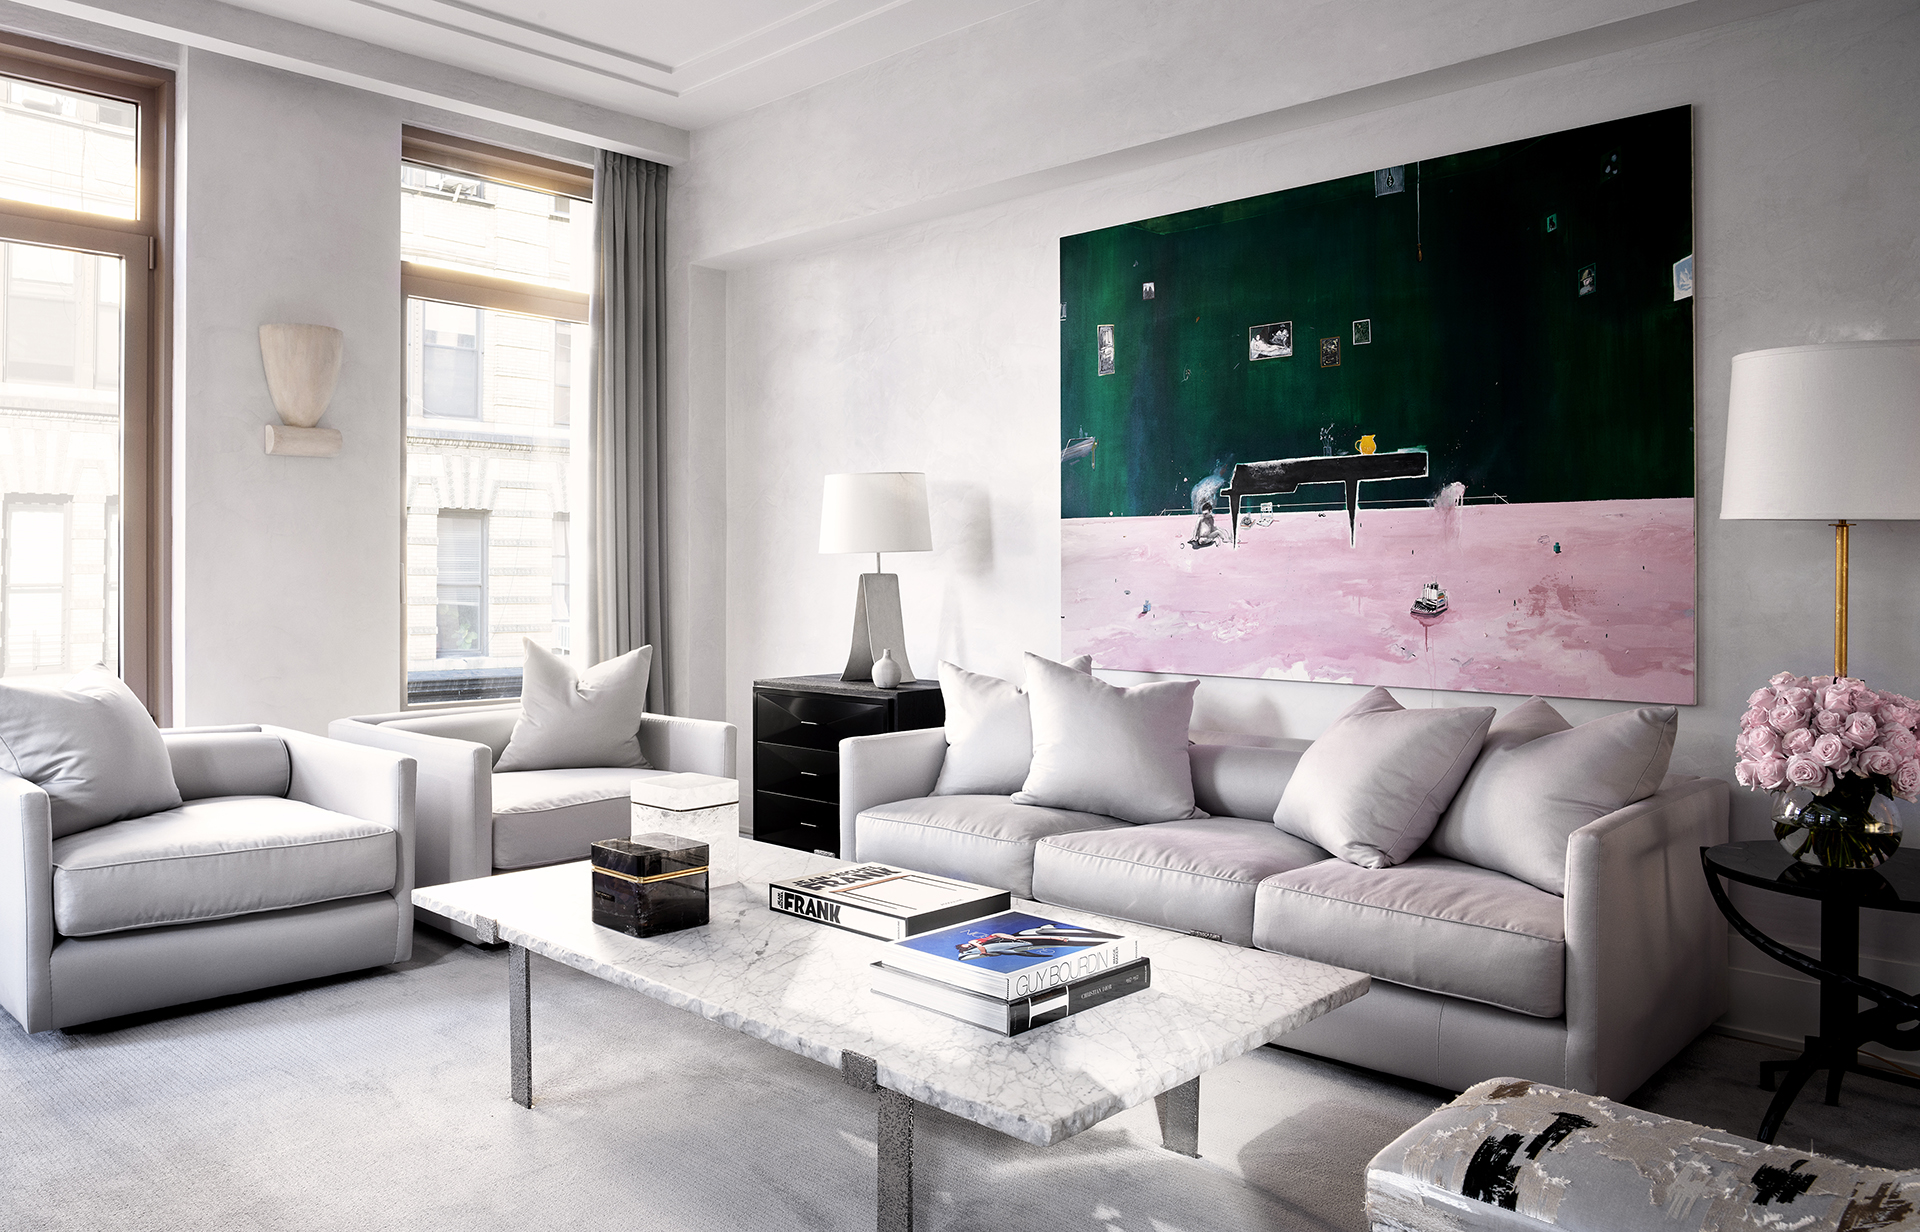 Contemporary living room in grey tones contrasting with a pink painting